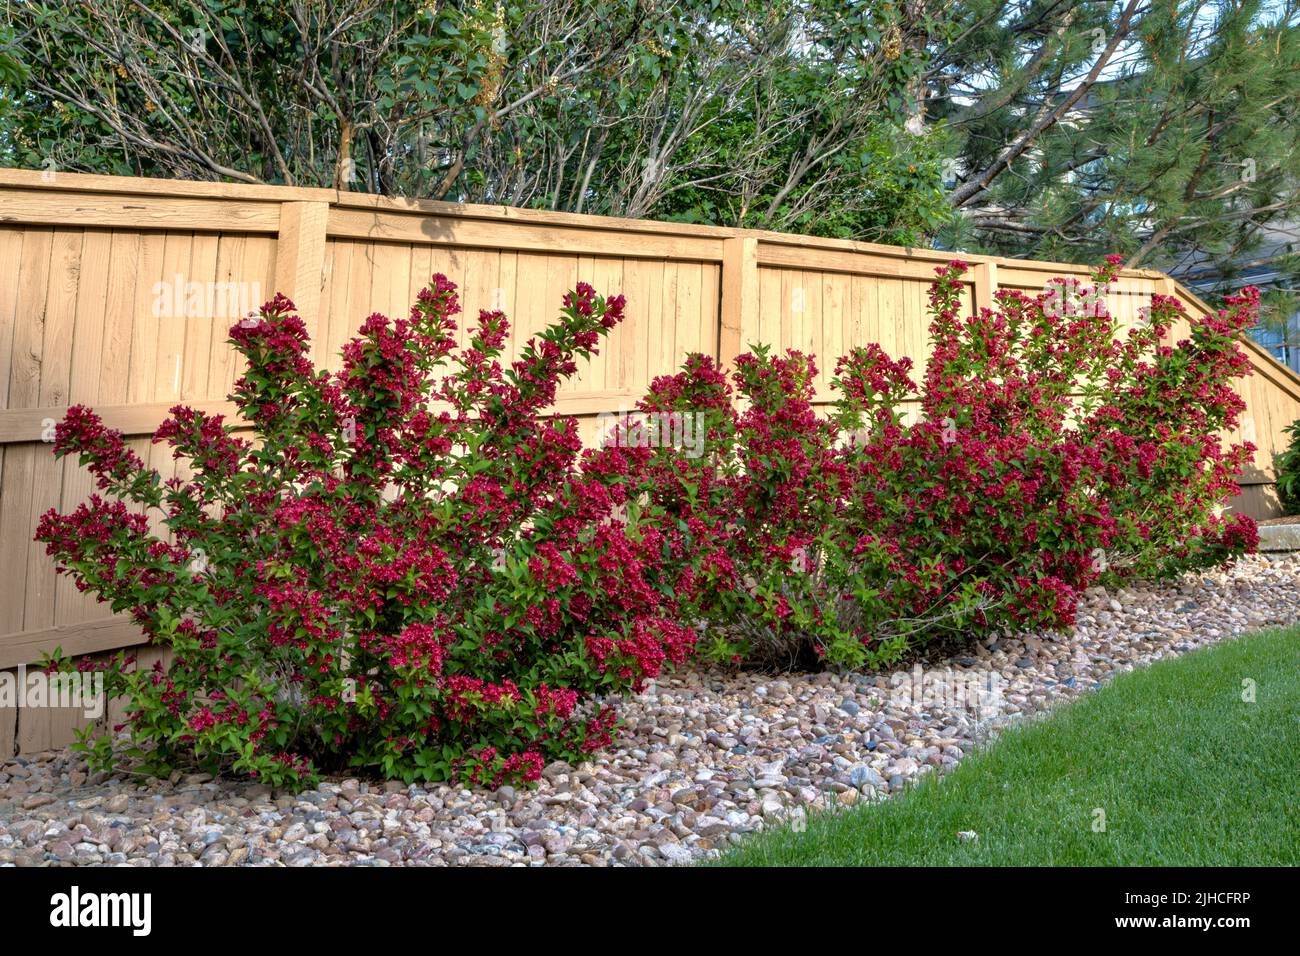 Red Prince Weigela shrubs in full bloom during early summer. Stock Photo